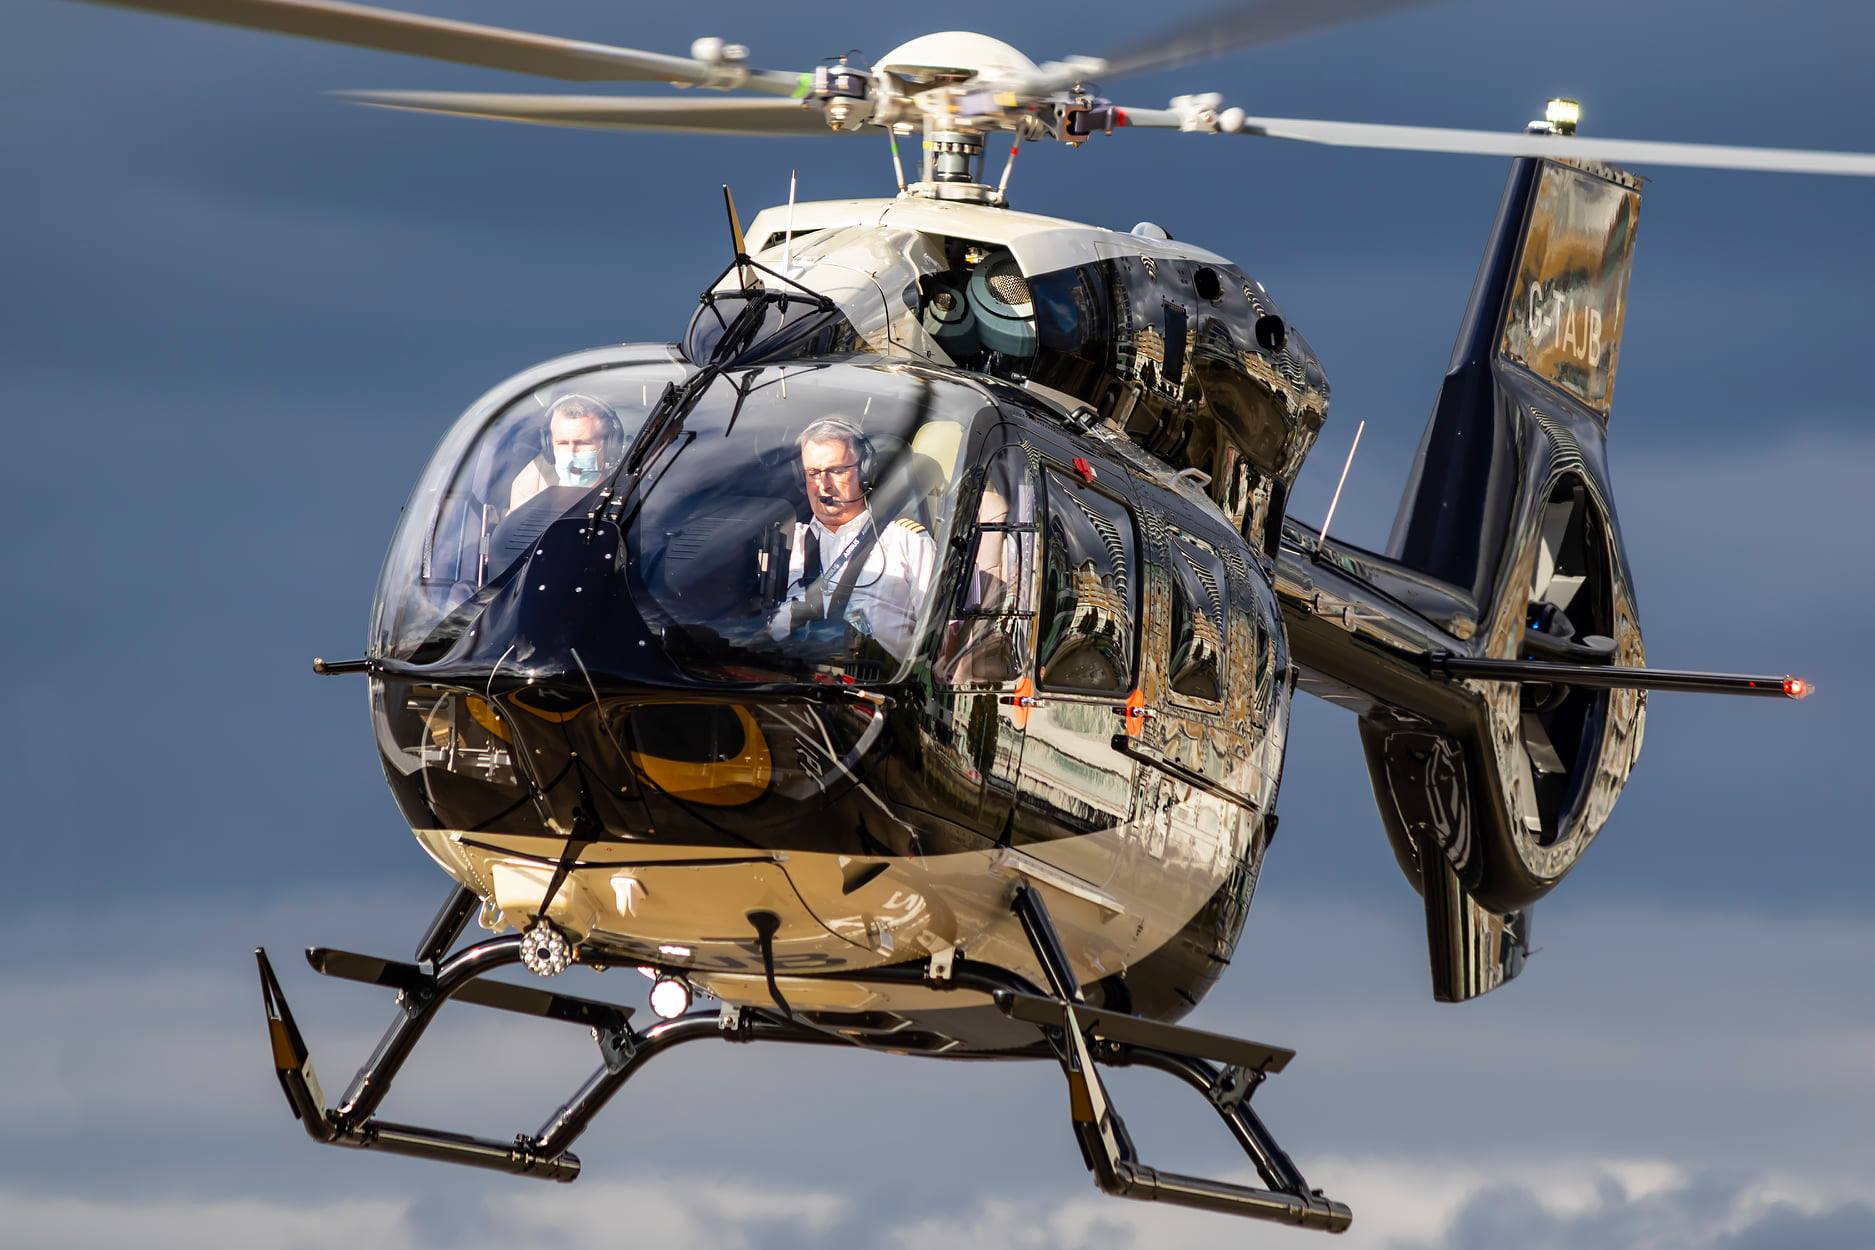 An Airbus H145 arrives at London West Heliport in the U.K. Danny Nixon Photo